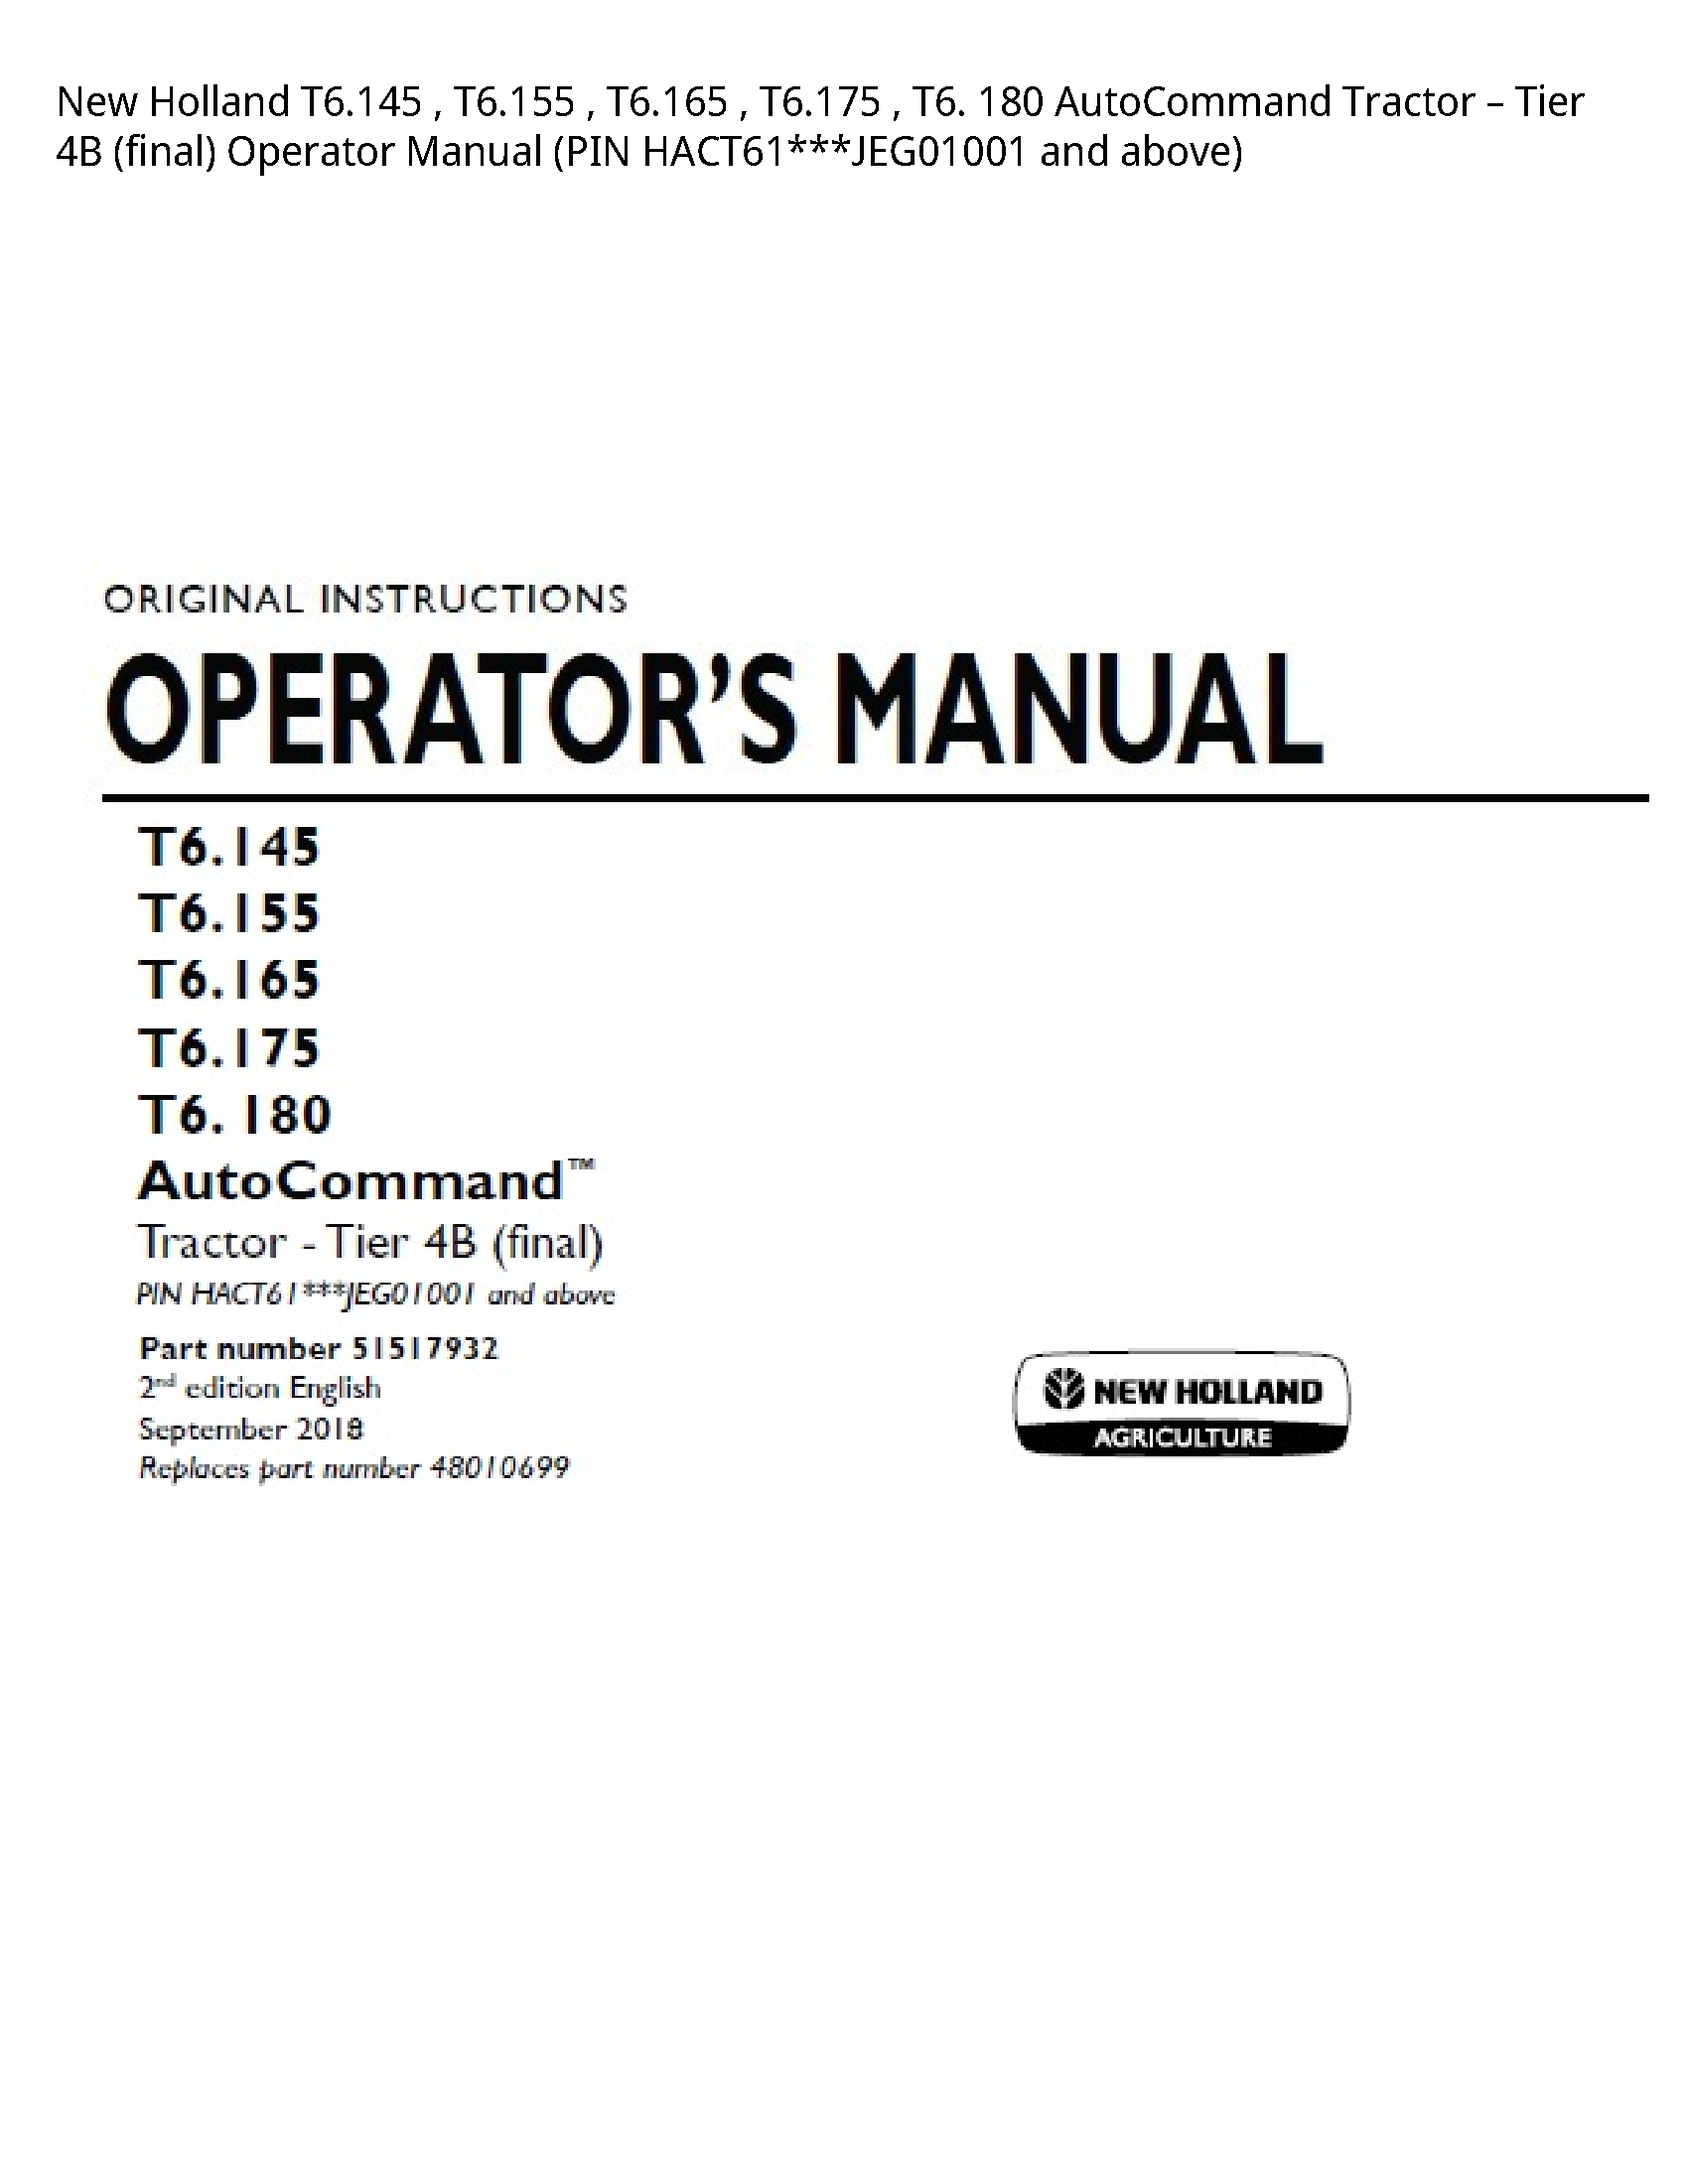 New Holland T6.145 AutoCommand Tractor Tier (final) Operator manual